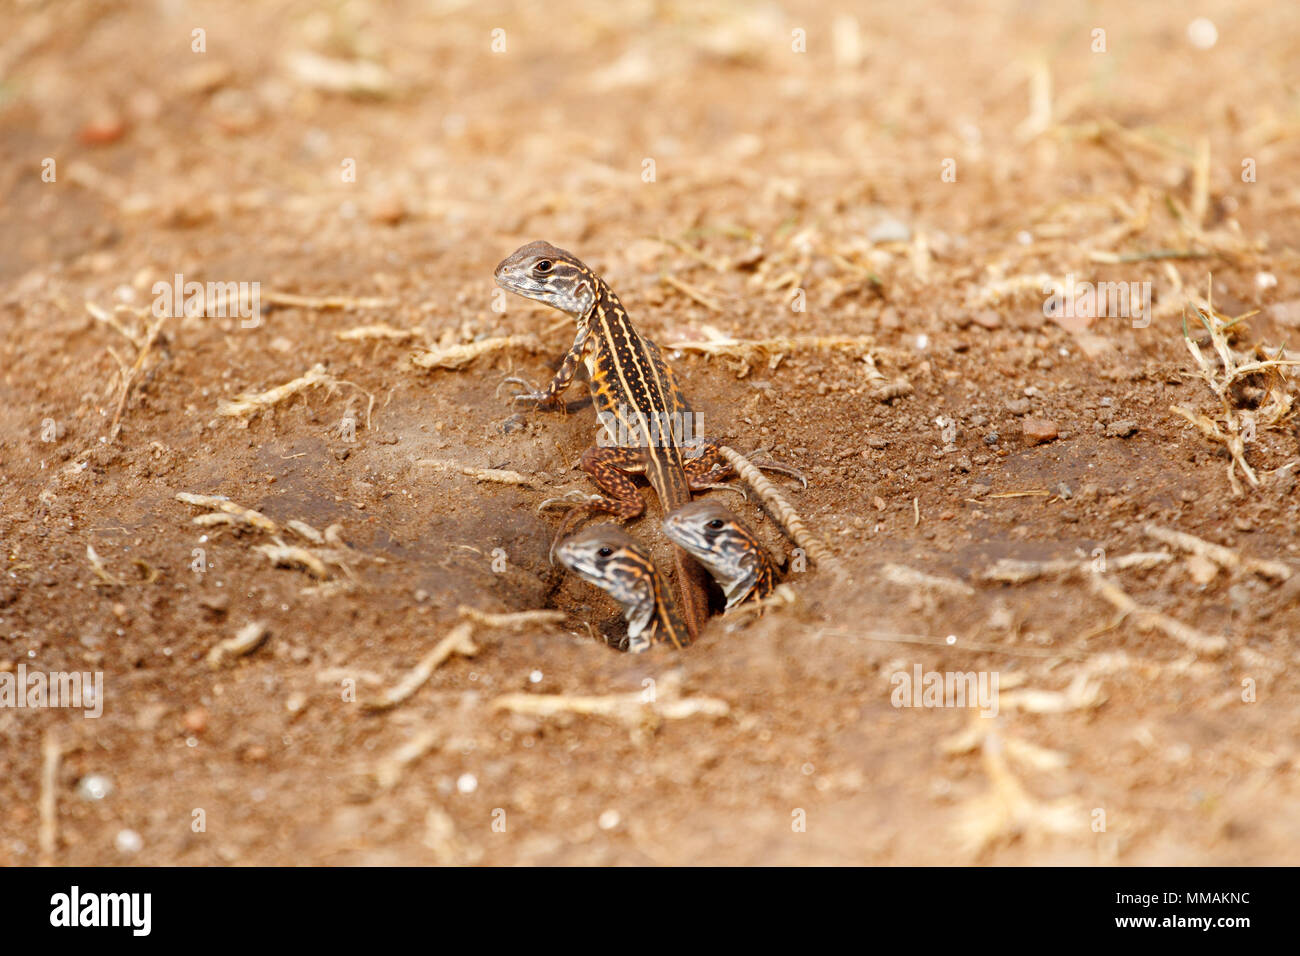 Newborn butterfly lizard /Butterfly agama (Leiolepis belliana ssp. ocellata) emerge from the burrow Stock Photo